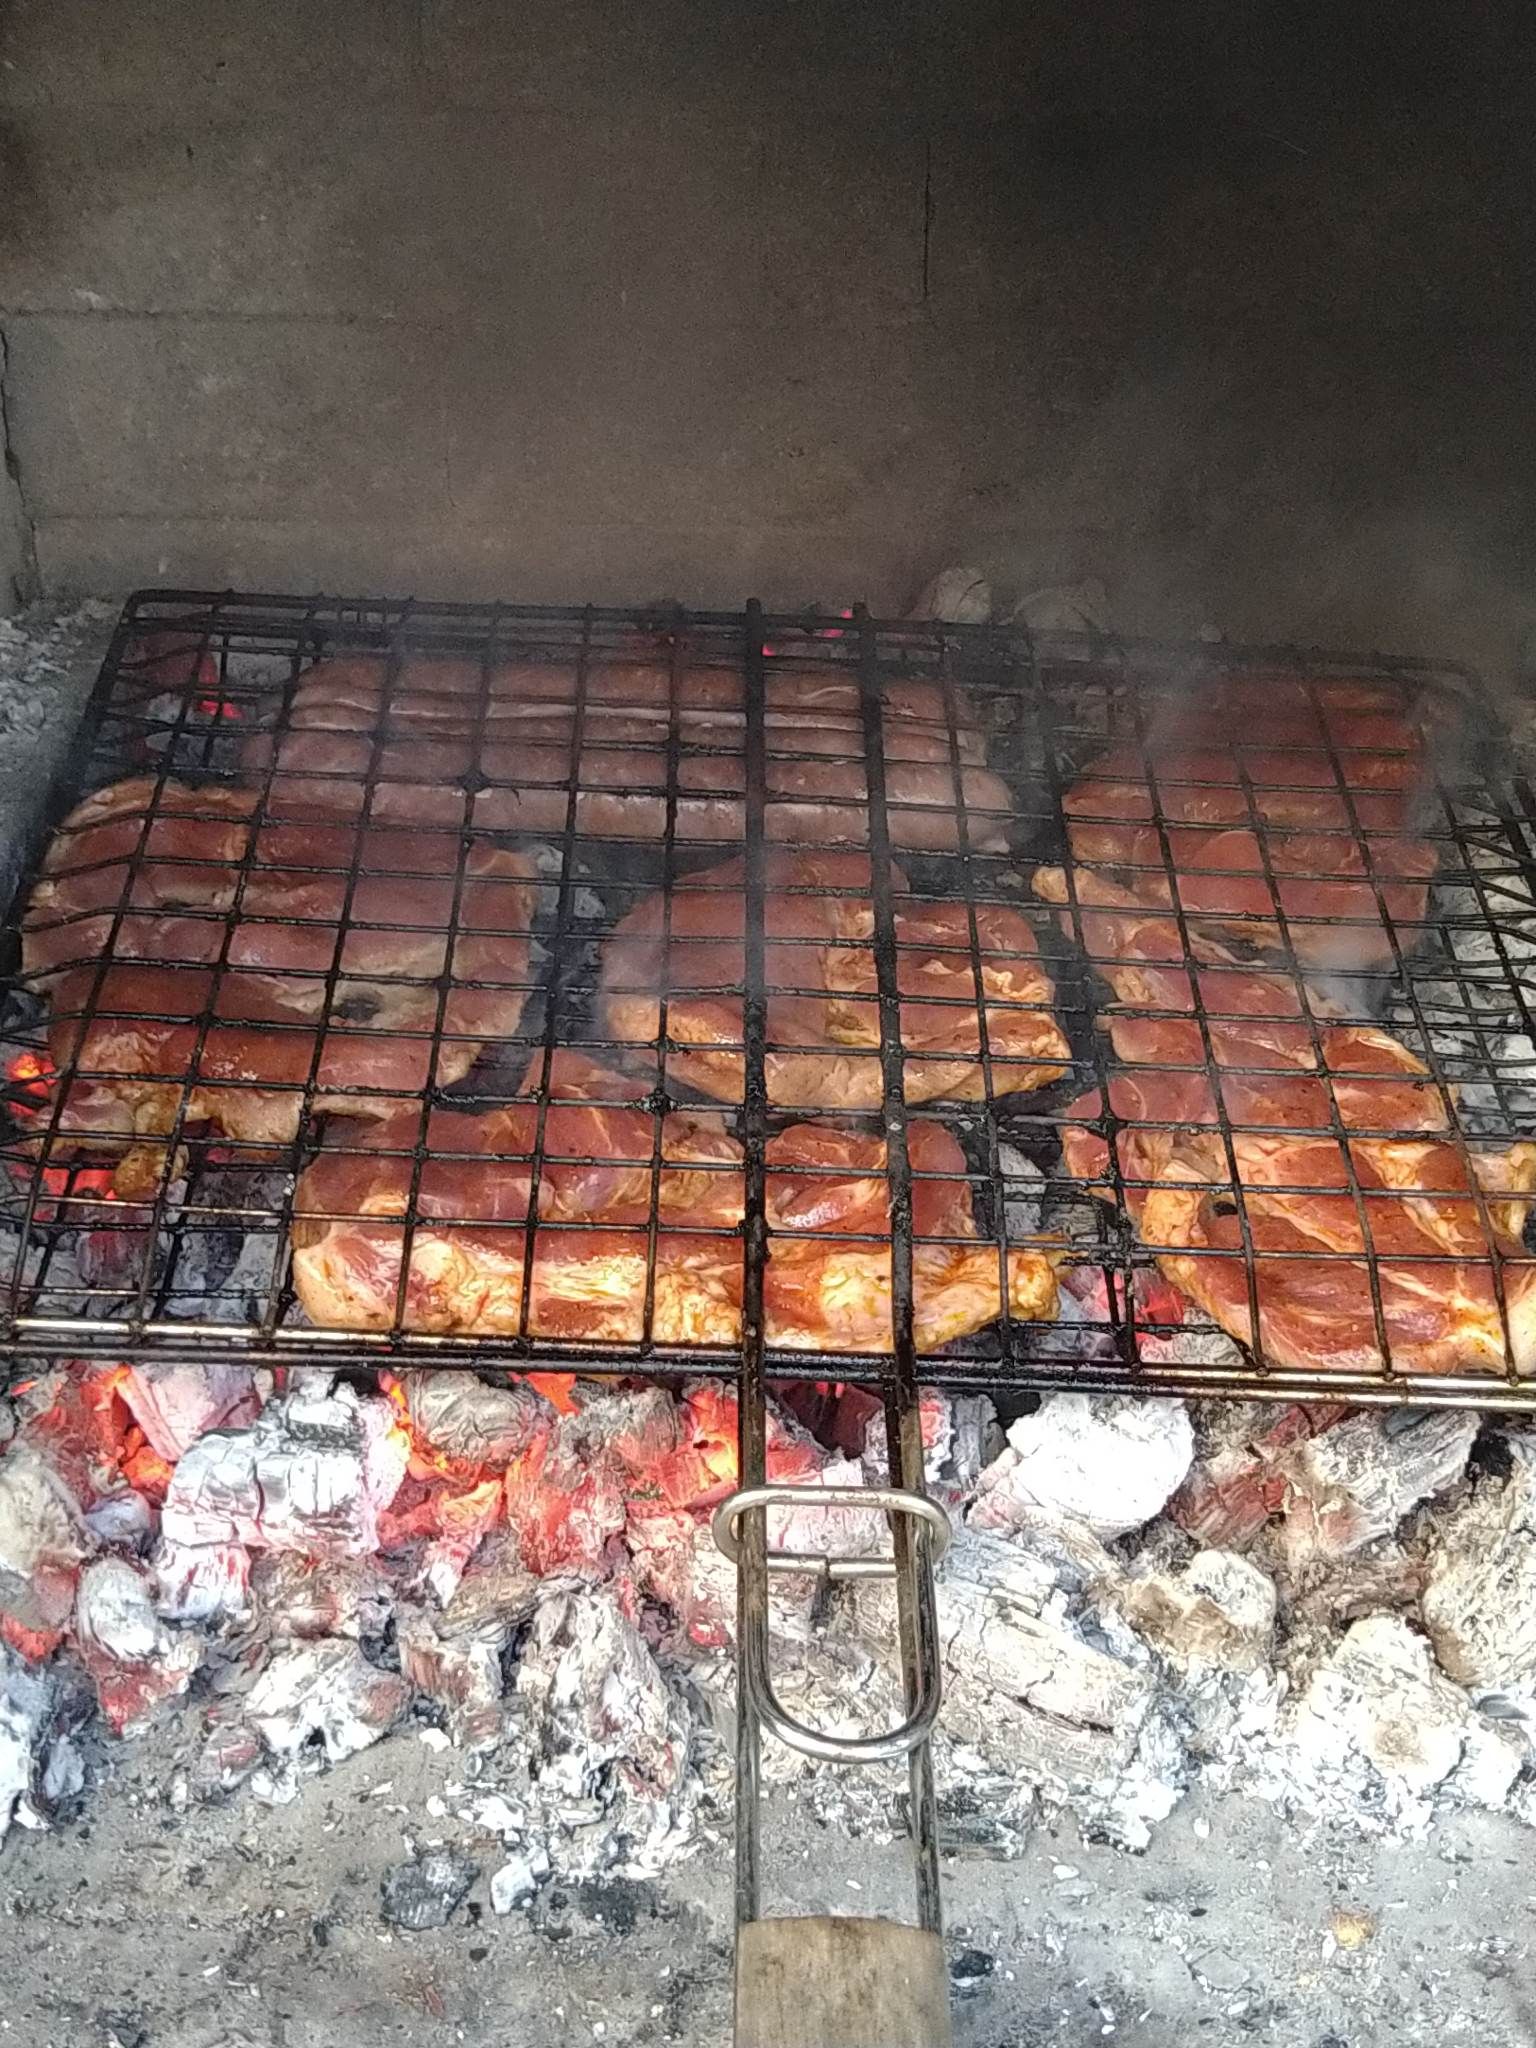 The promised December barbecue